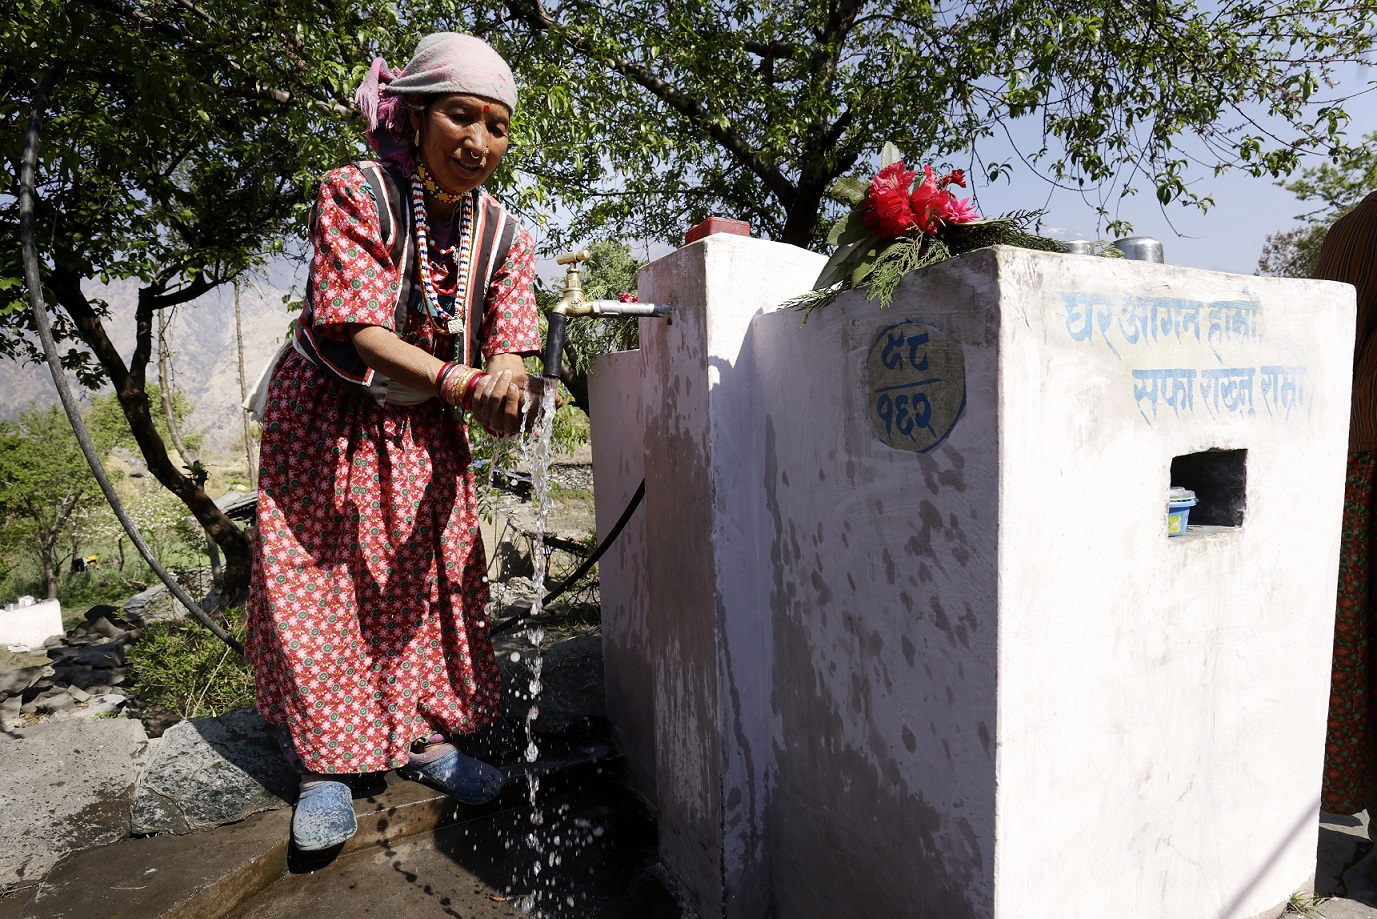 Sanja Thekare washes her hands at an outdoor water tap.